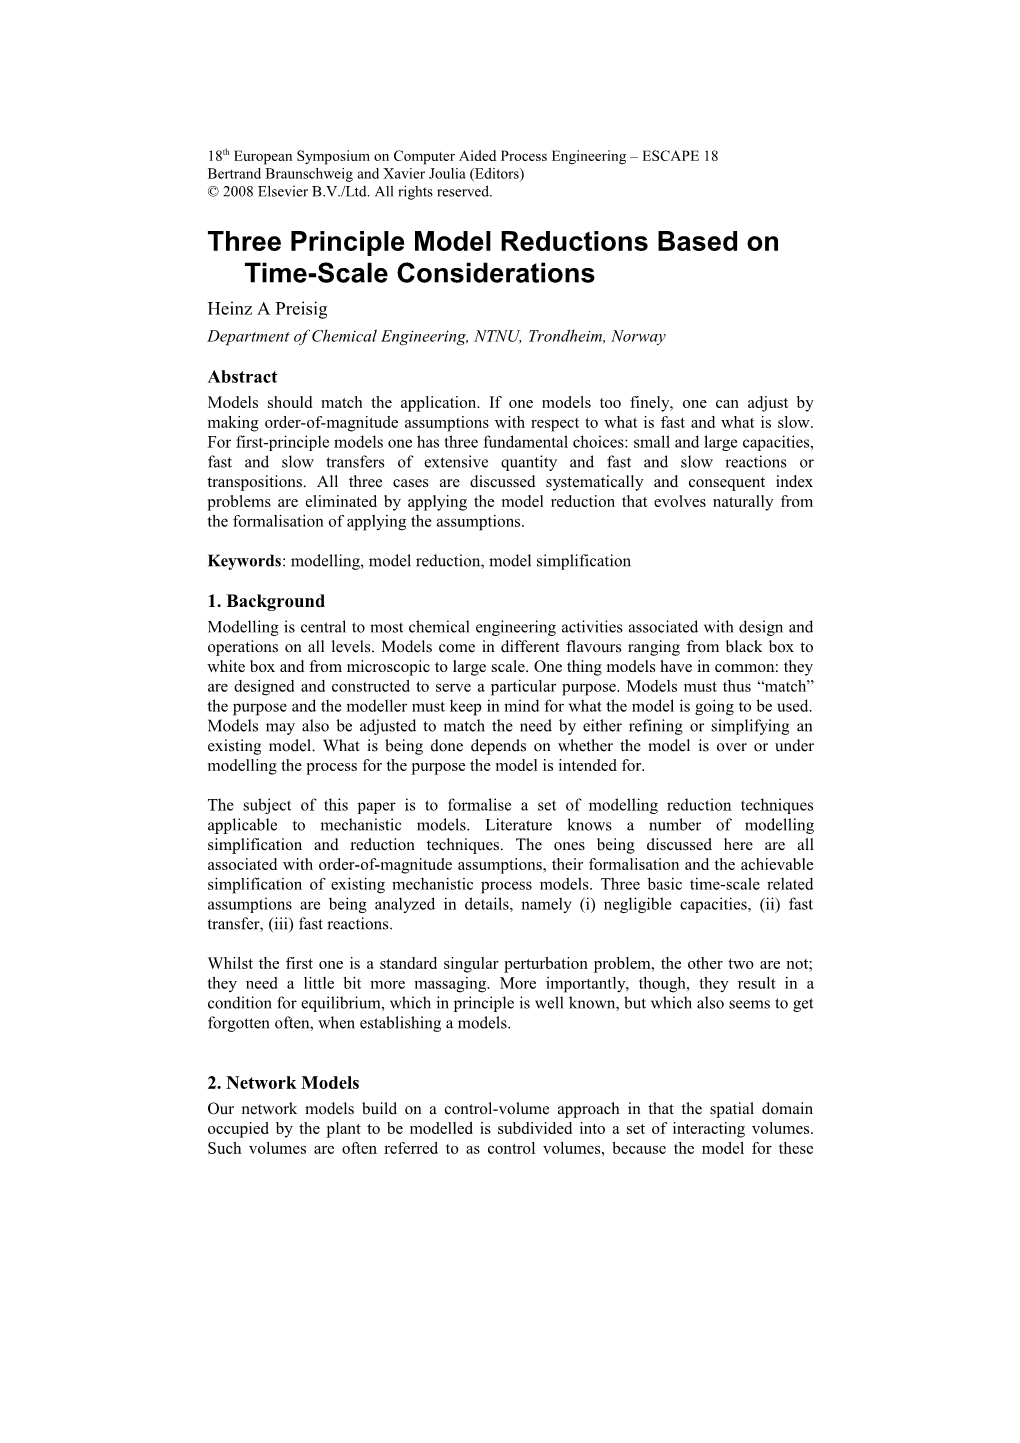 Three Principle Model Reductions Based on Time-Scale Considerations